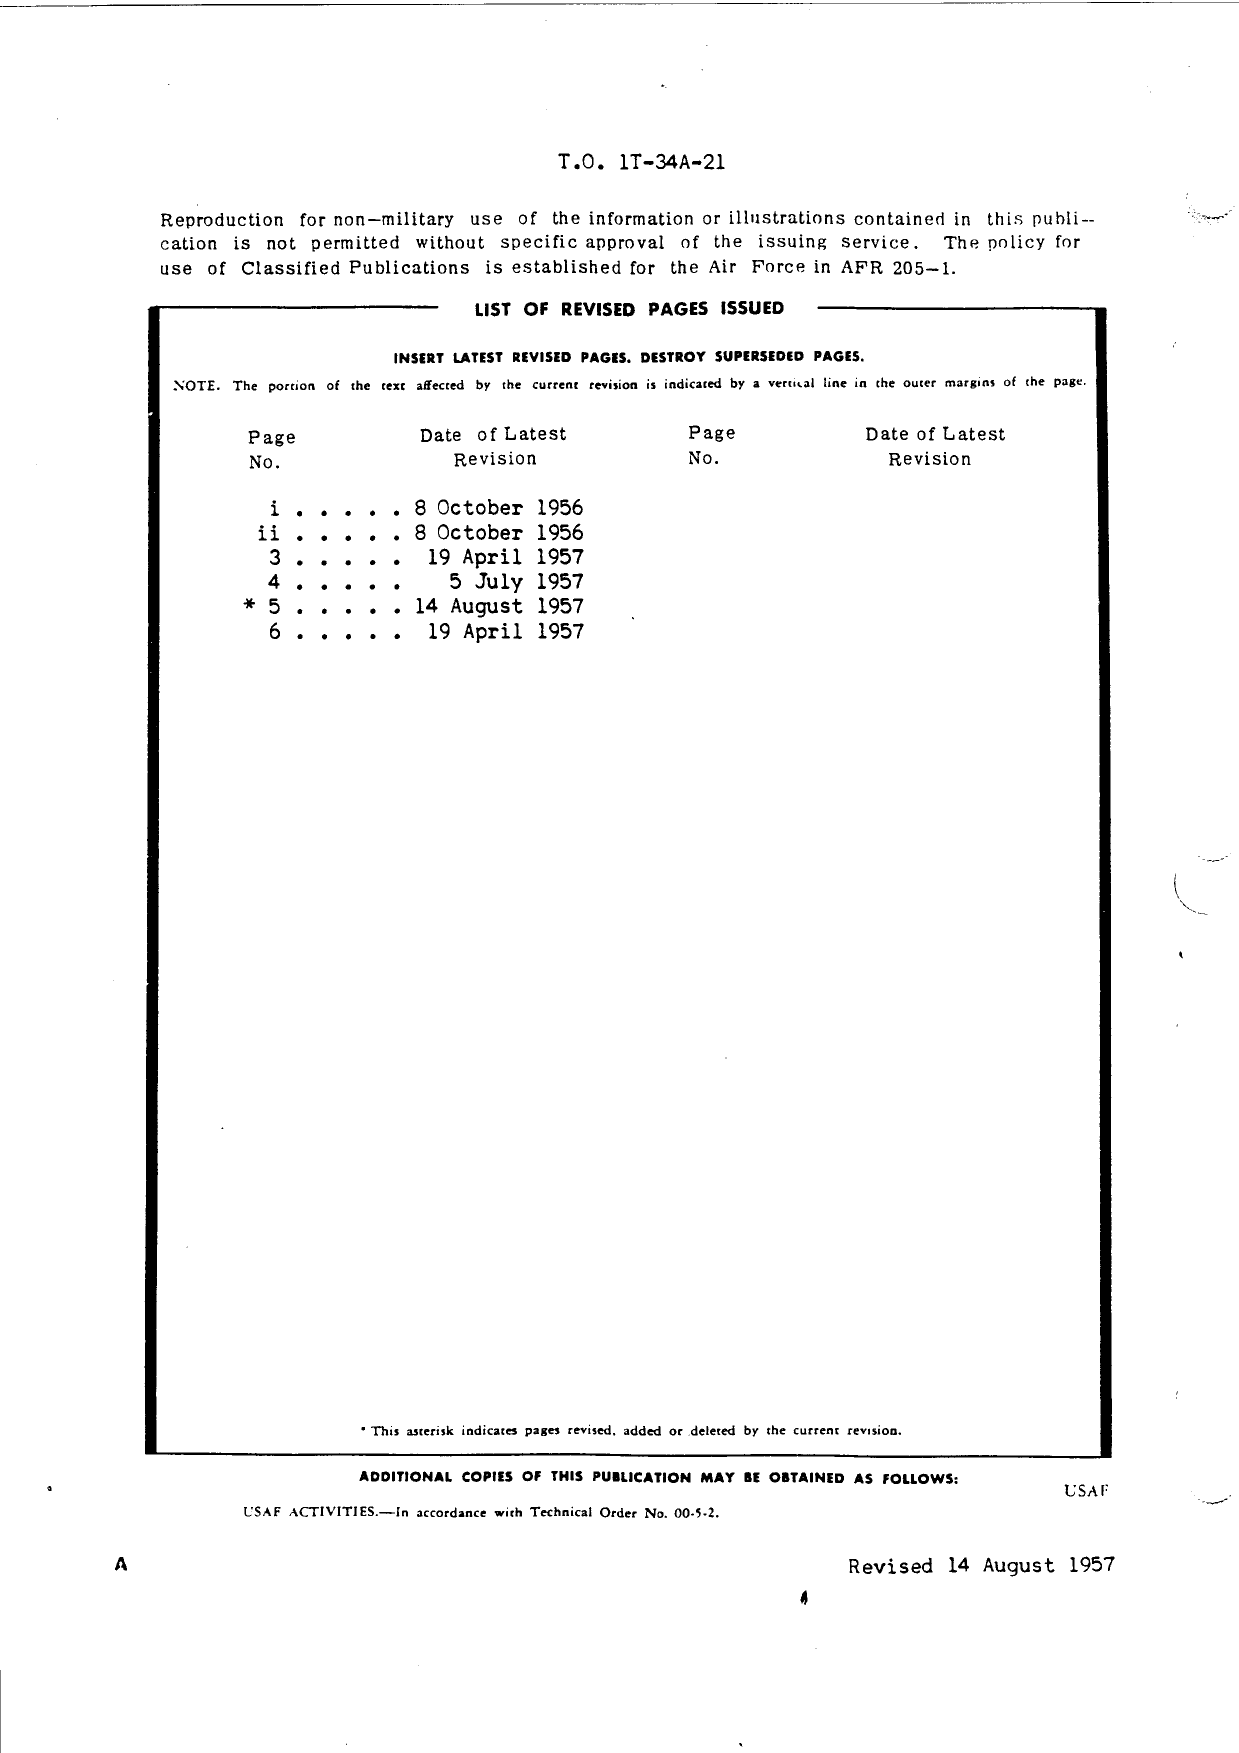 Sample page 2 from AirCorps Library document: Master Guide Aircraft Inventory Record for T-34A Aircraft